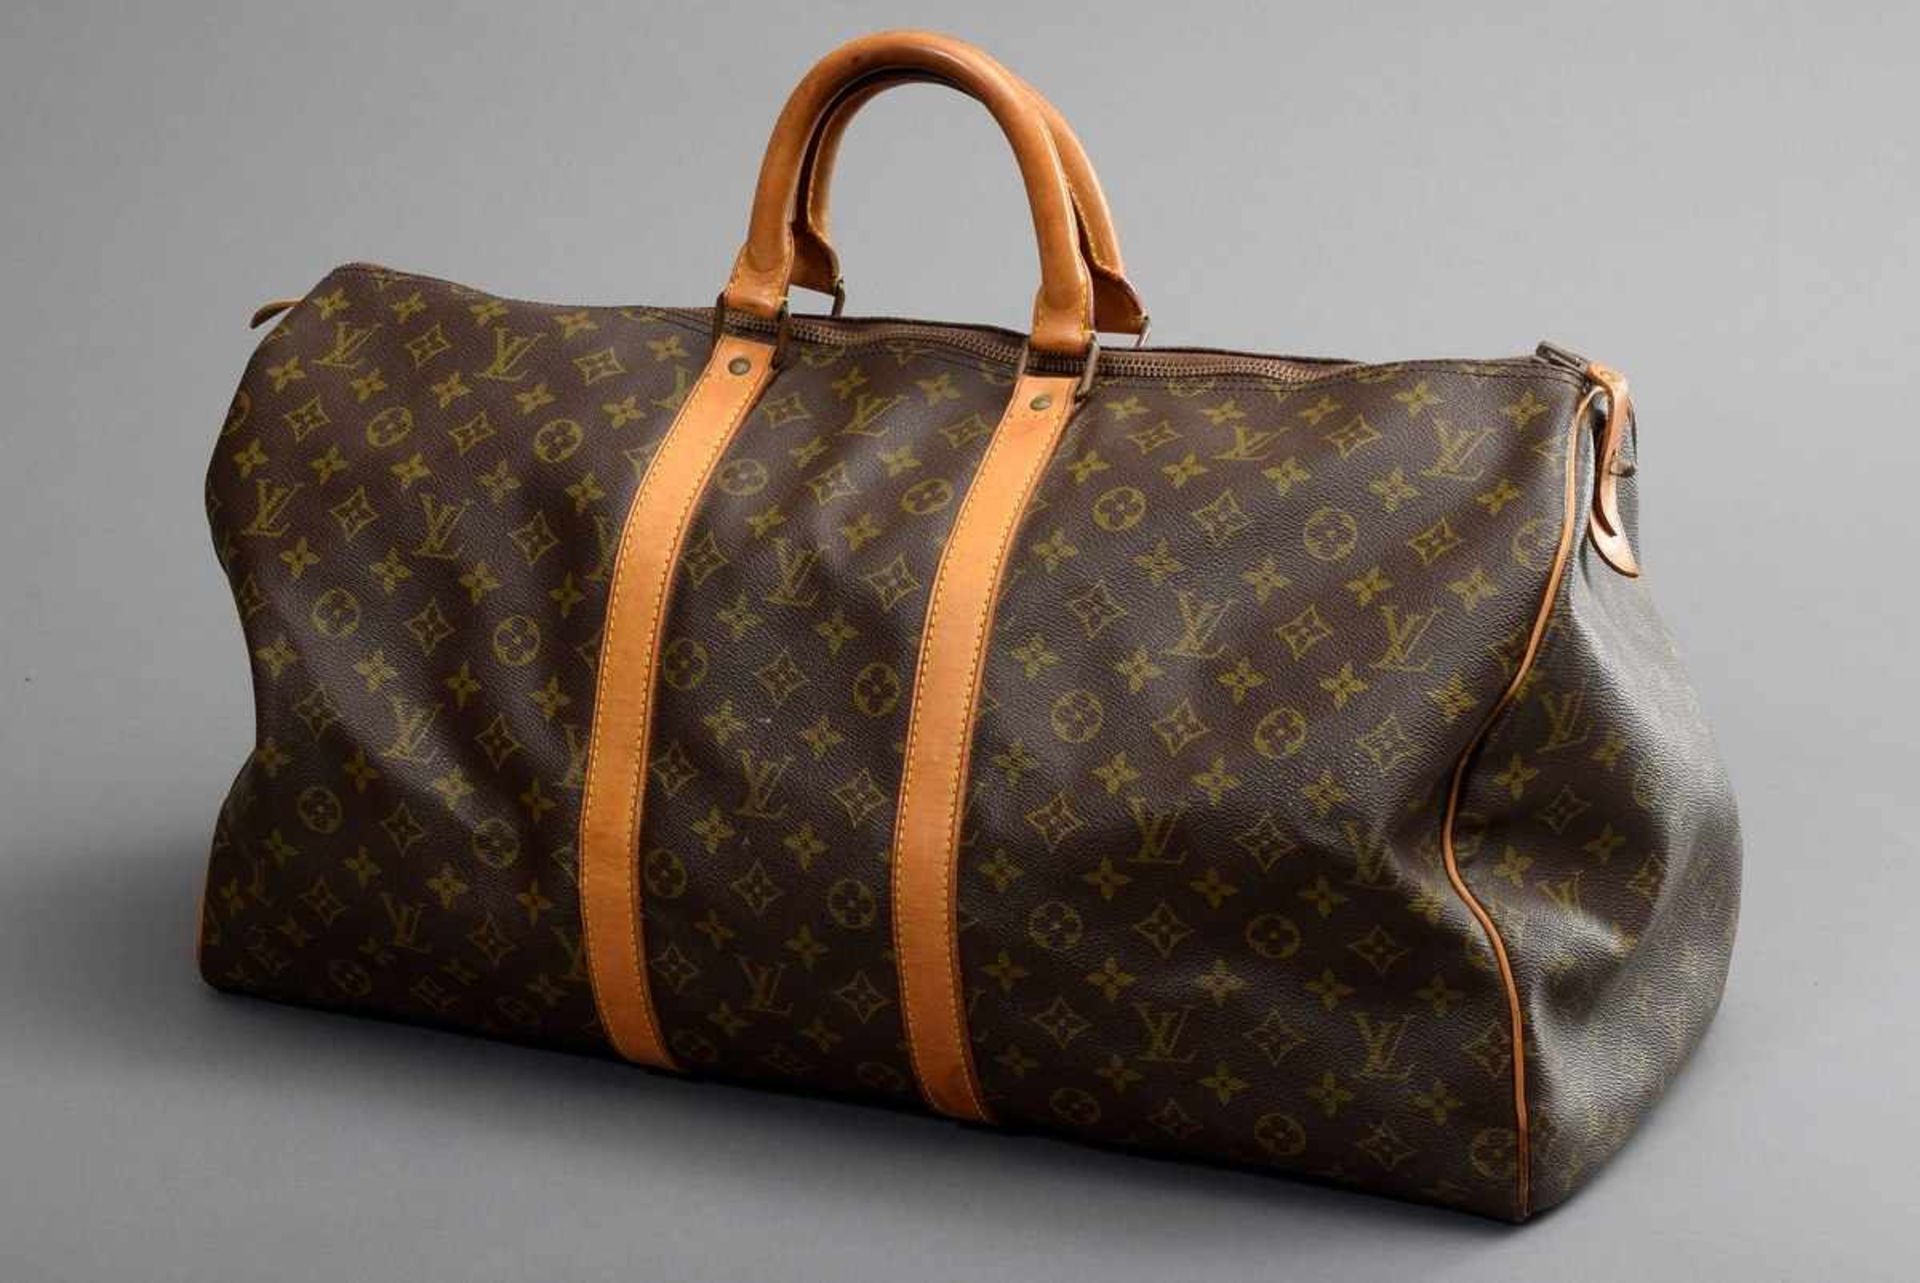 Louis Vuitton "Keepall 55" in monogram canvas, vintage 90s, 31x55x26cm, traces of use